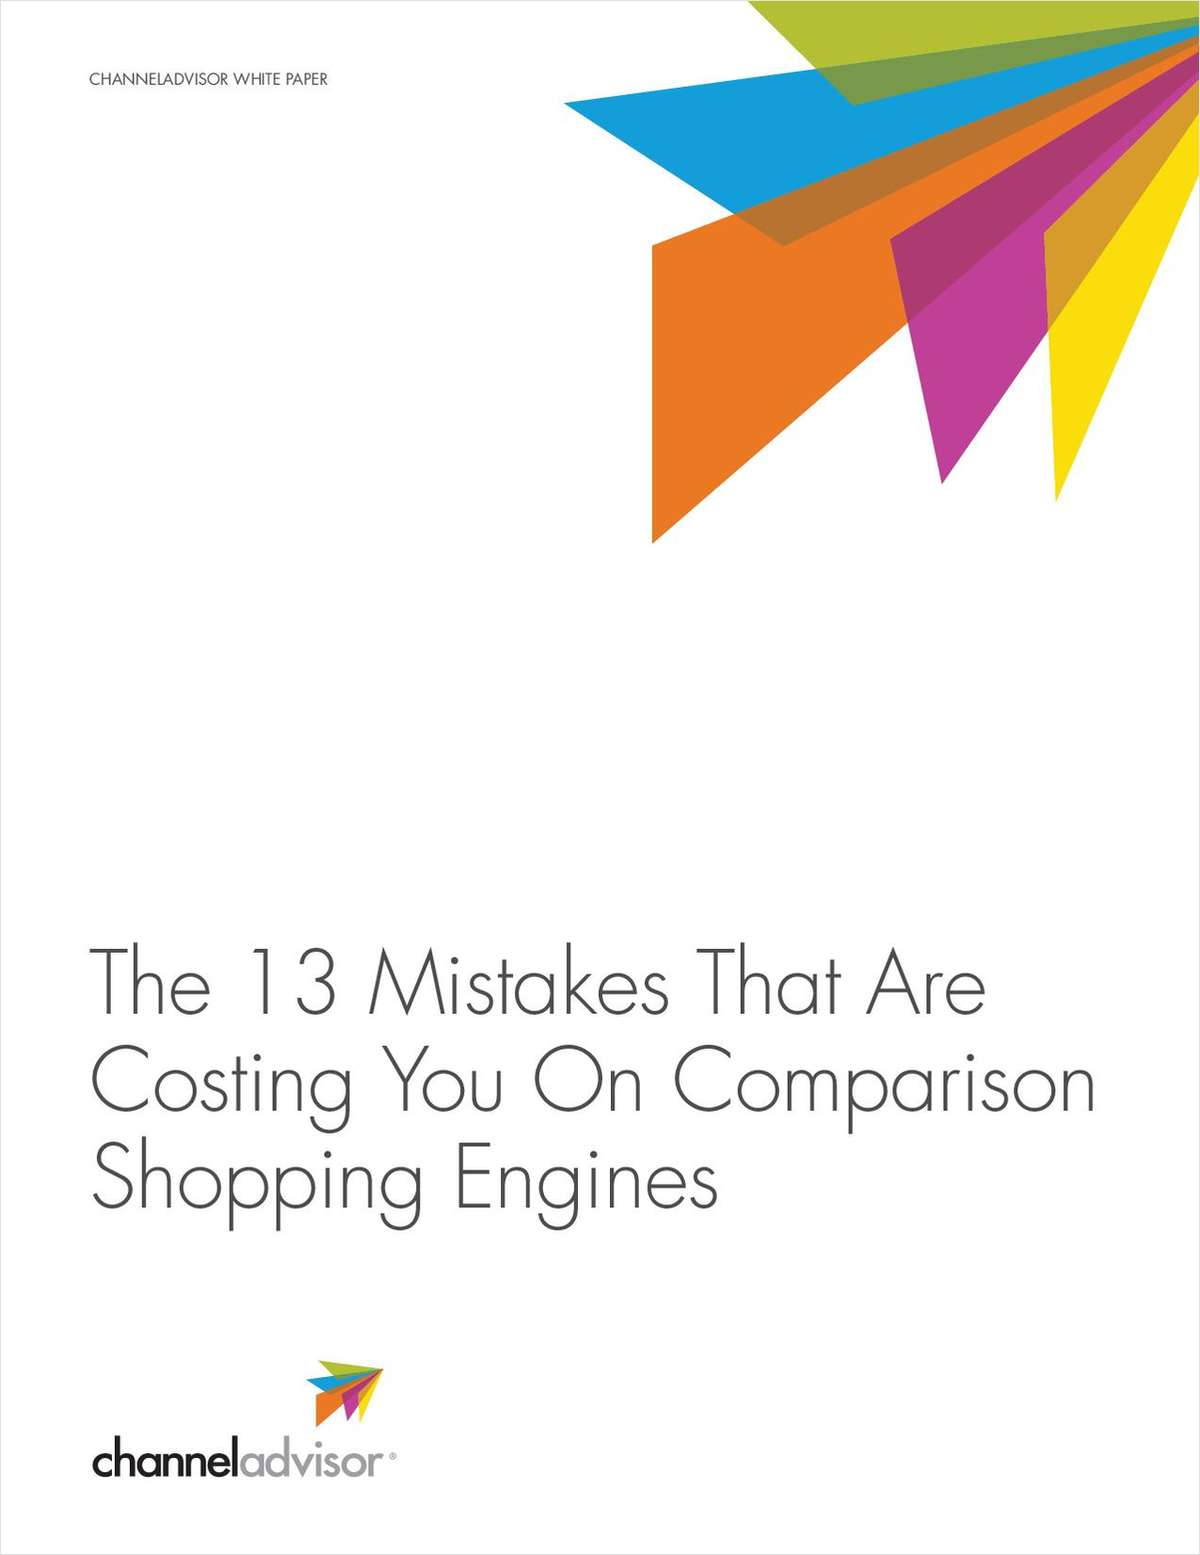 The 13 Mistakes that are Costing Retailers on Comparison Shopping Engines